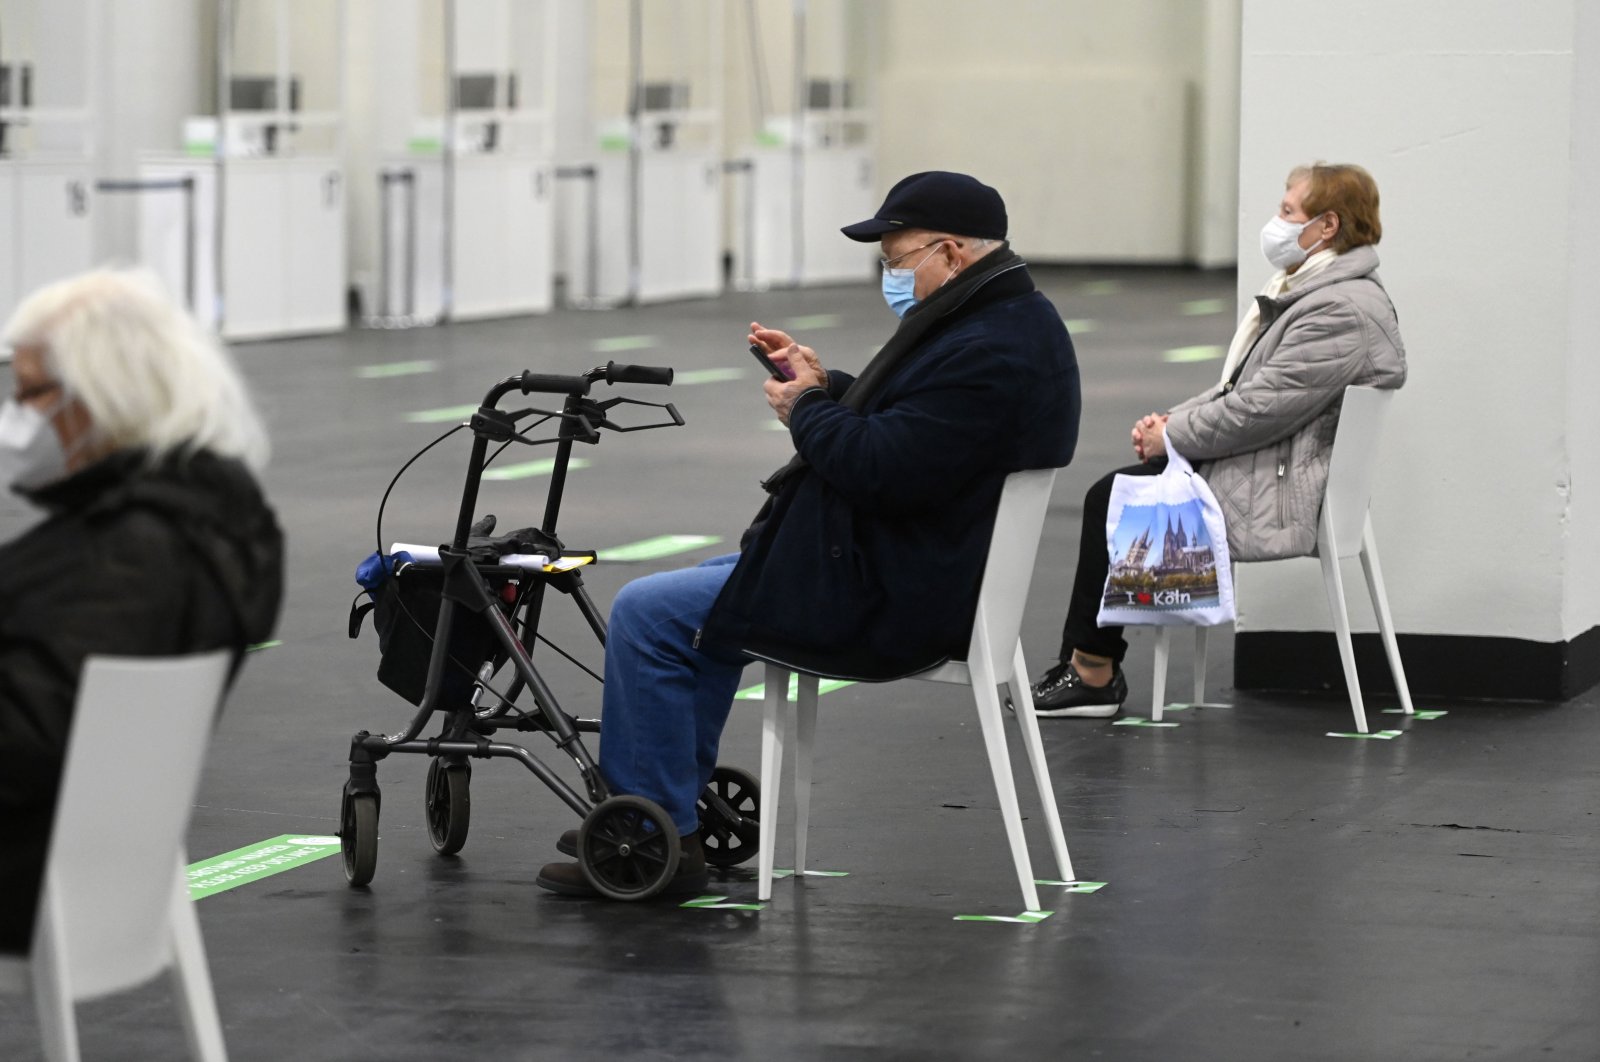 An elderly man checks a smartphone while waiting at a COVID-19 vaccination center to receive a vaccine in Cologne, western Germany, Feb. 8, 2021. (AFP Photo)